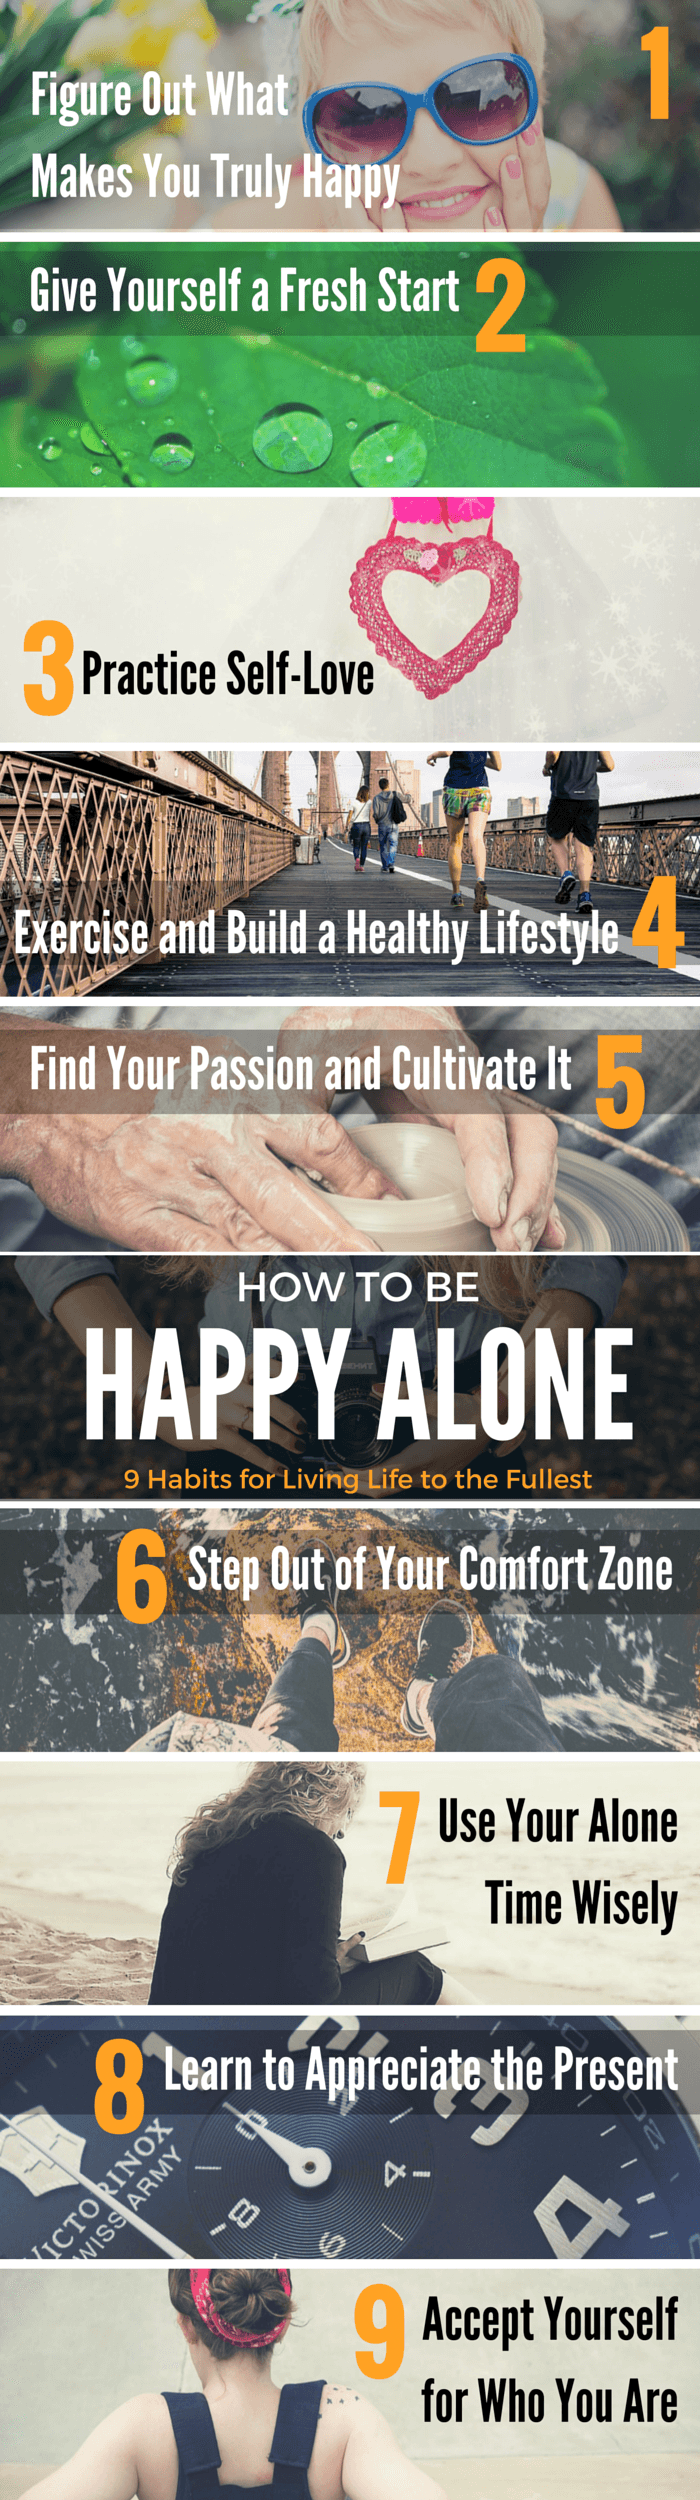 15 Ways to Be Happy Alone and Live a Full Life